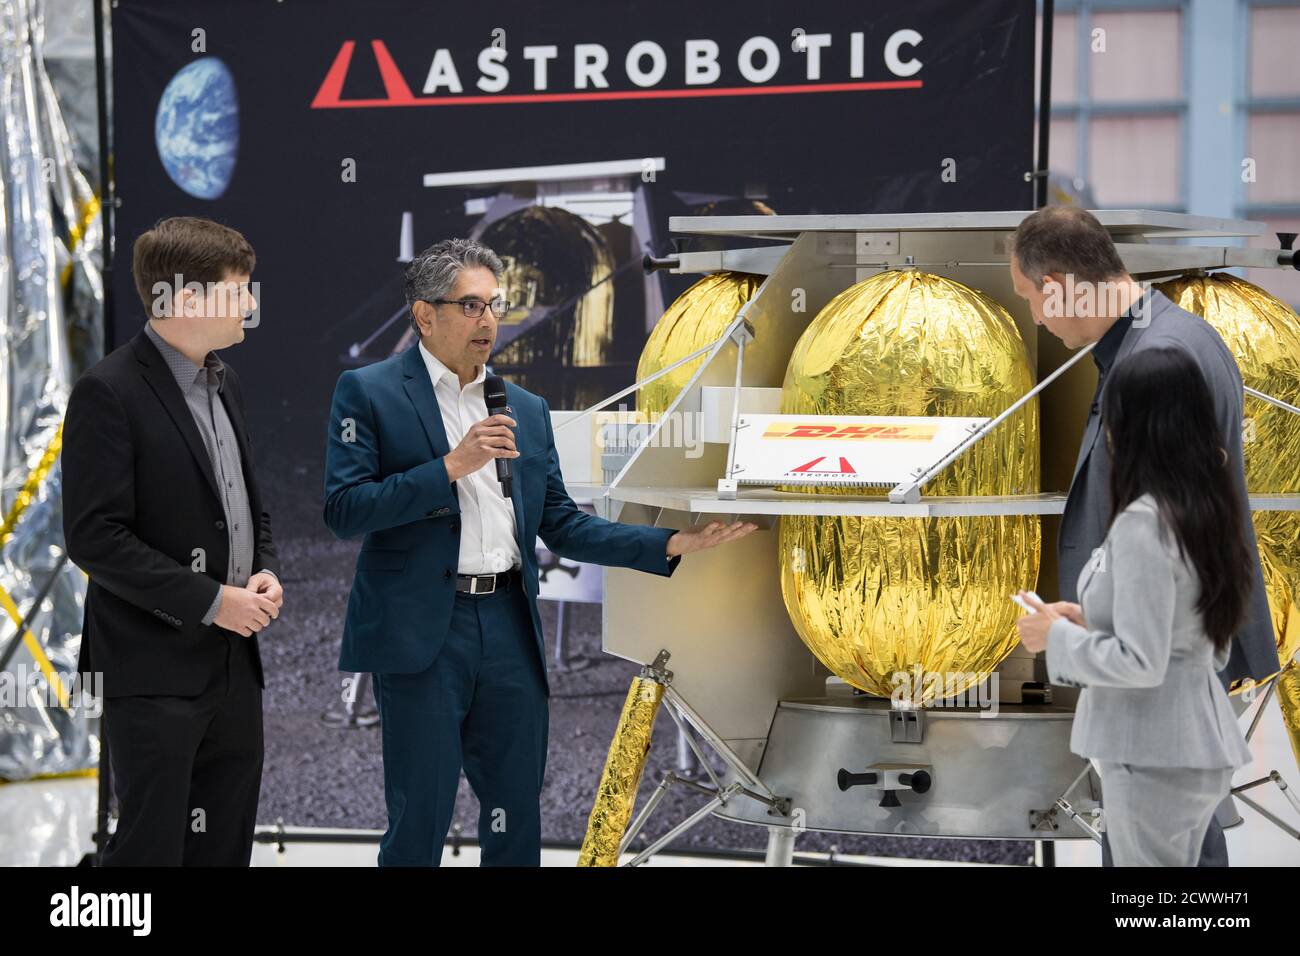 Commercial Lunar Payload Services Announcement NASA Associate Administrator, Science Mission Directorate, Thomas Zurbuchen, second from right, speaks to Astrobotic CEO, John Thornton, left, and Astrobotic Mission Director, Sharad Bhaskaran, second from left, about their lunar lander, Friday, May 31, 2019, at Goddard Space Flight Center in Md. Astrobotic, Intuitive Machines, and Orbit Beyond have been selected to provide the first lunar landers for the Artemis program's lunar surface exploration. " Stock Photo